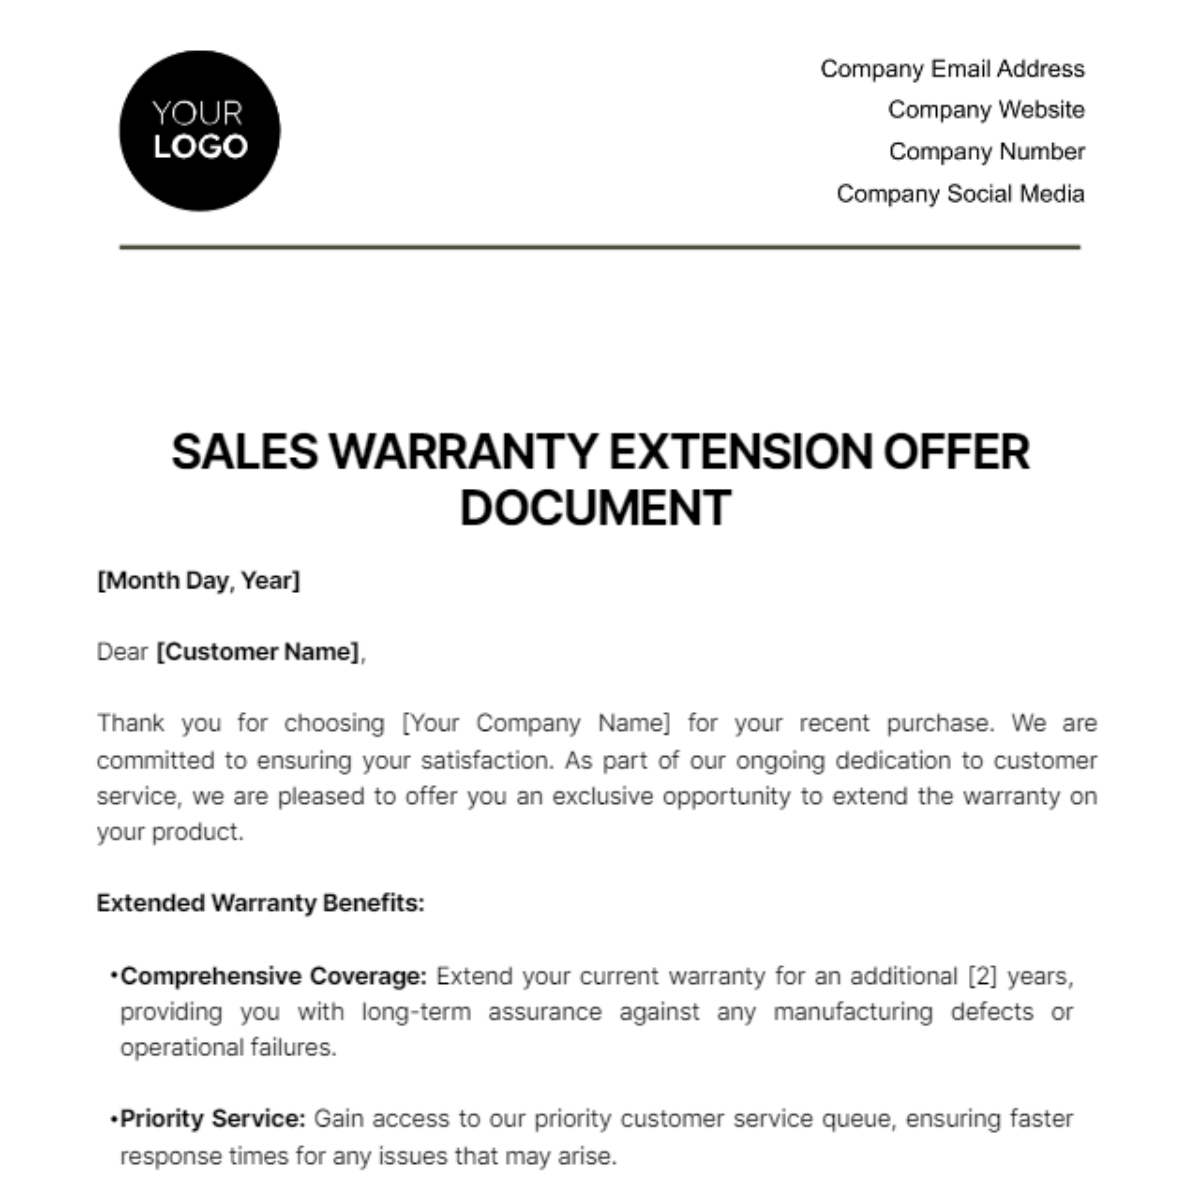 Sales Warranty Extension Offer Document Template